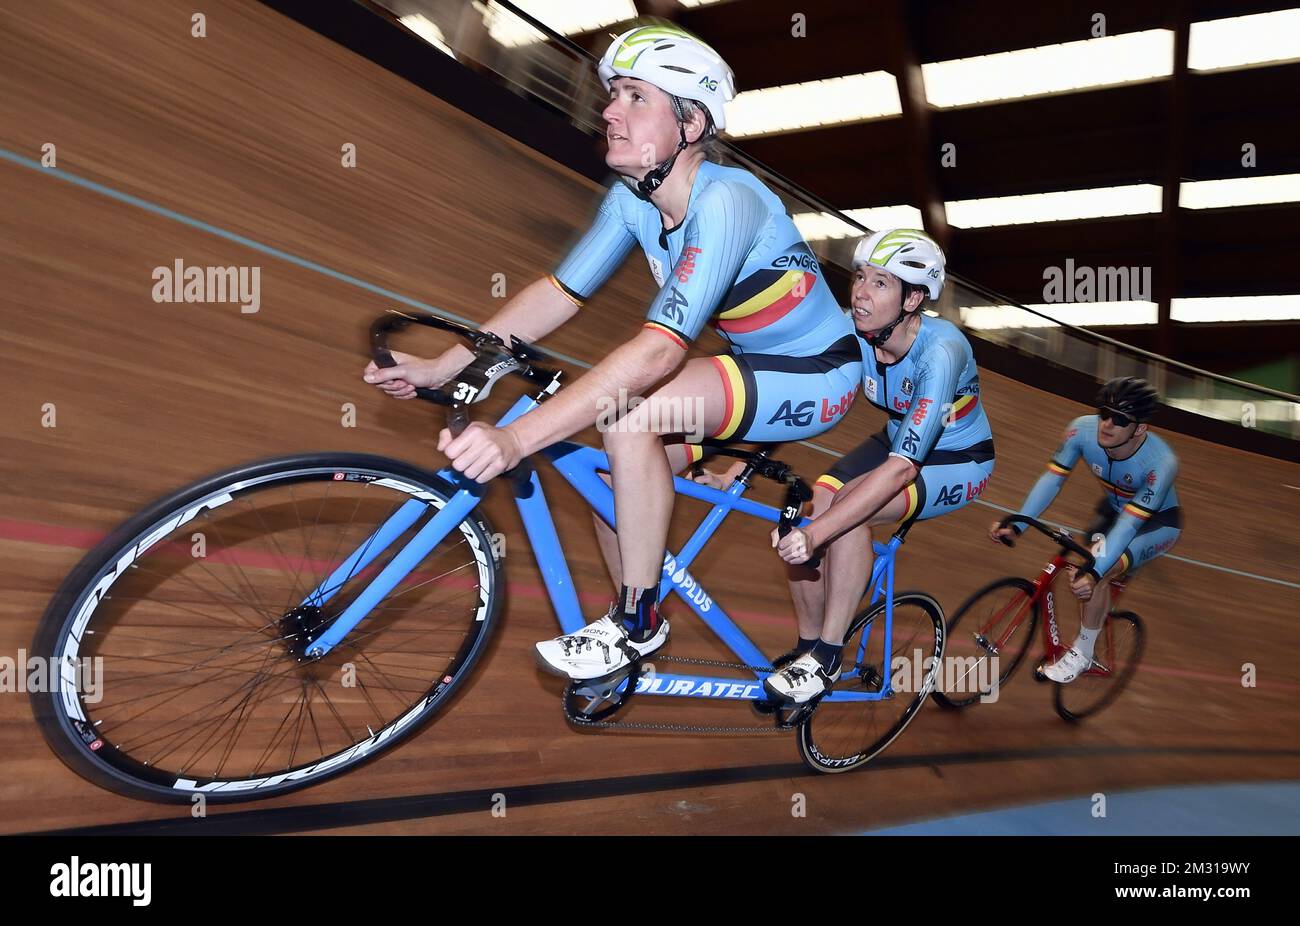 Paralympic cyclist tandem team Griet Hoet and Anneleen Monsieur pictured during the second day of a press visit to the training camp of the athletes of the Paralympic Team Belgium, ahead of the Tokyo 2020 Paralympic Games, Tuesday 29 October 2019, in Paris. The Tokyo 2020 Paralympic Games take place from 25 August to 06 September 2020. BELGA PHOTO ERIC LALMAND Stock Photo